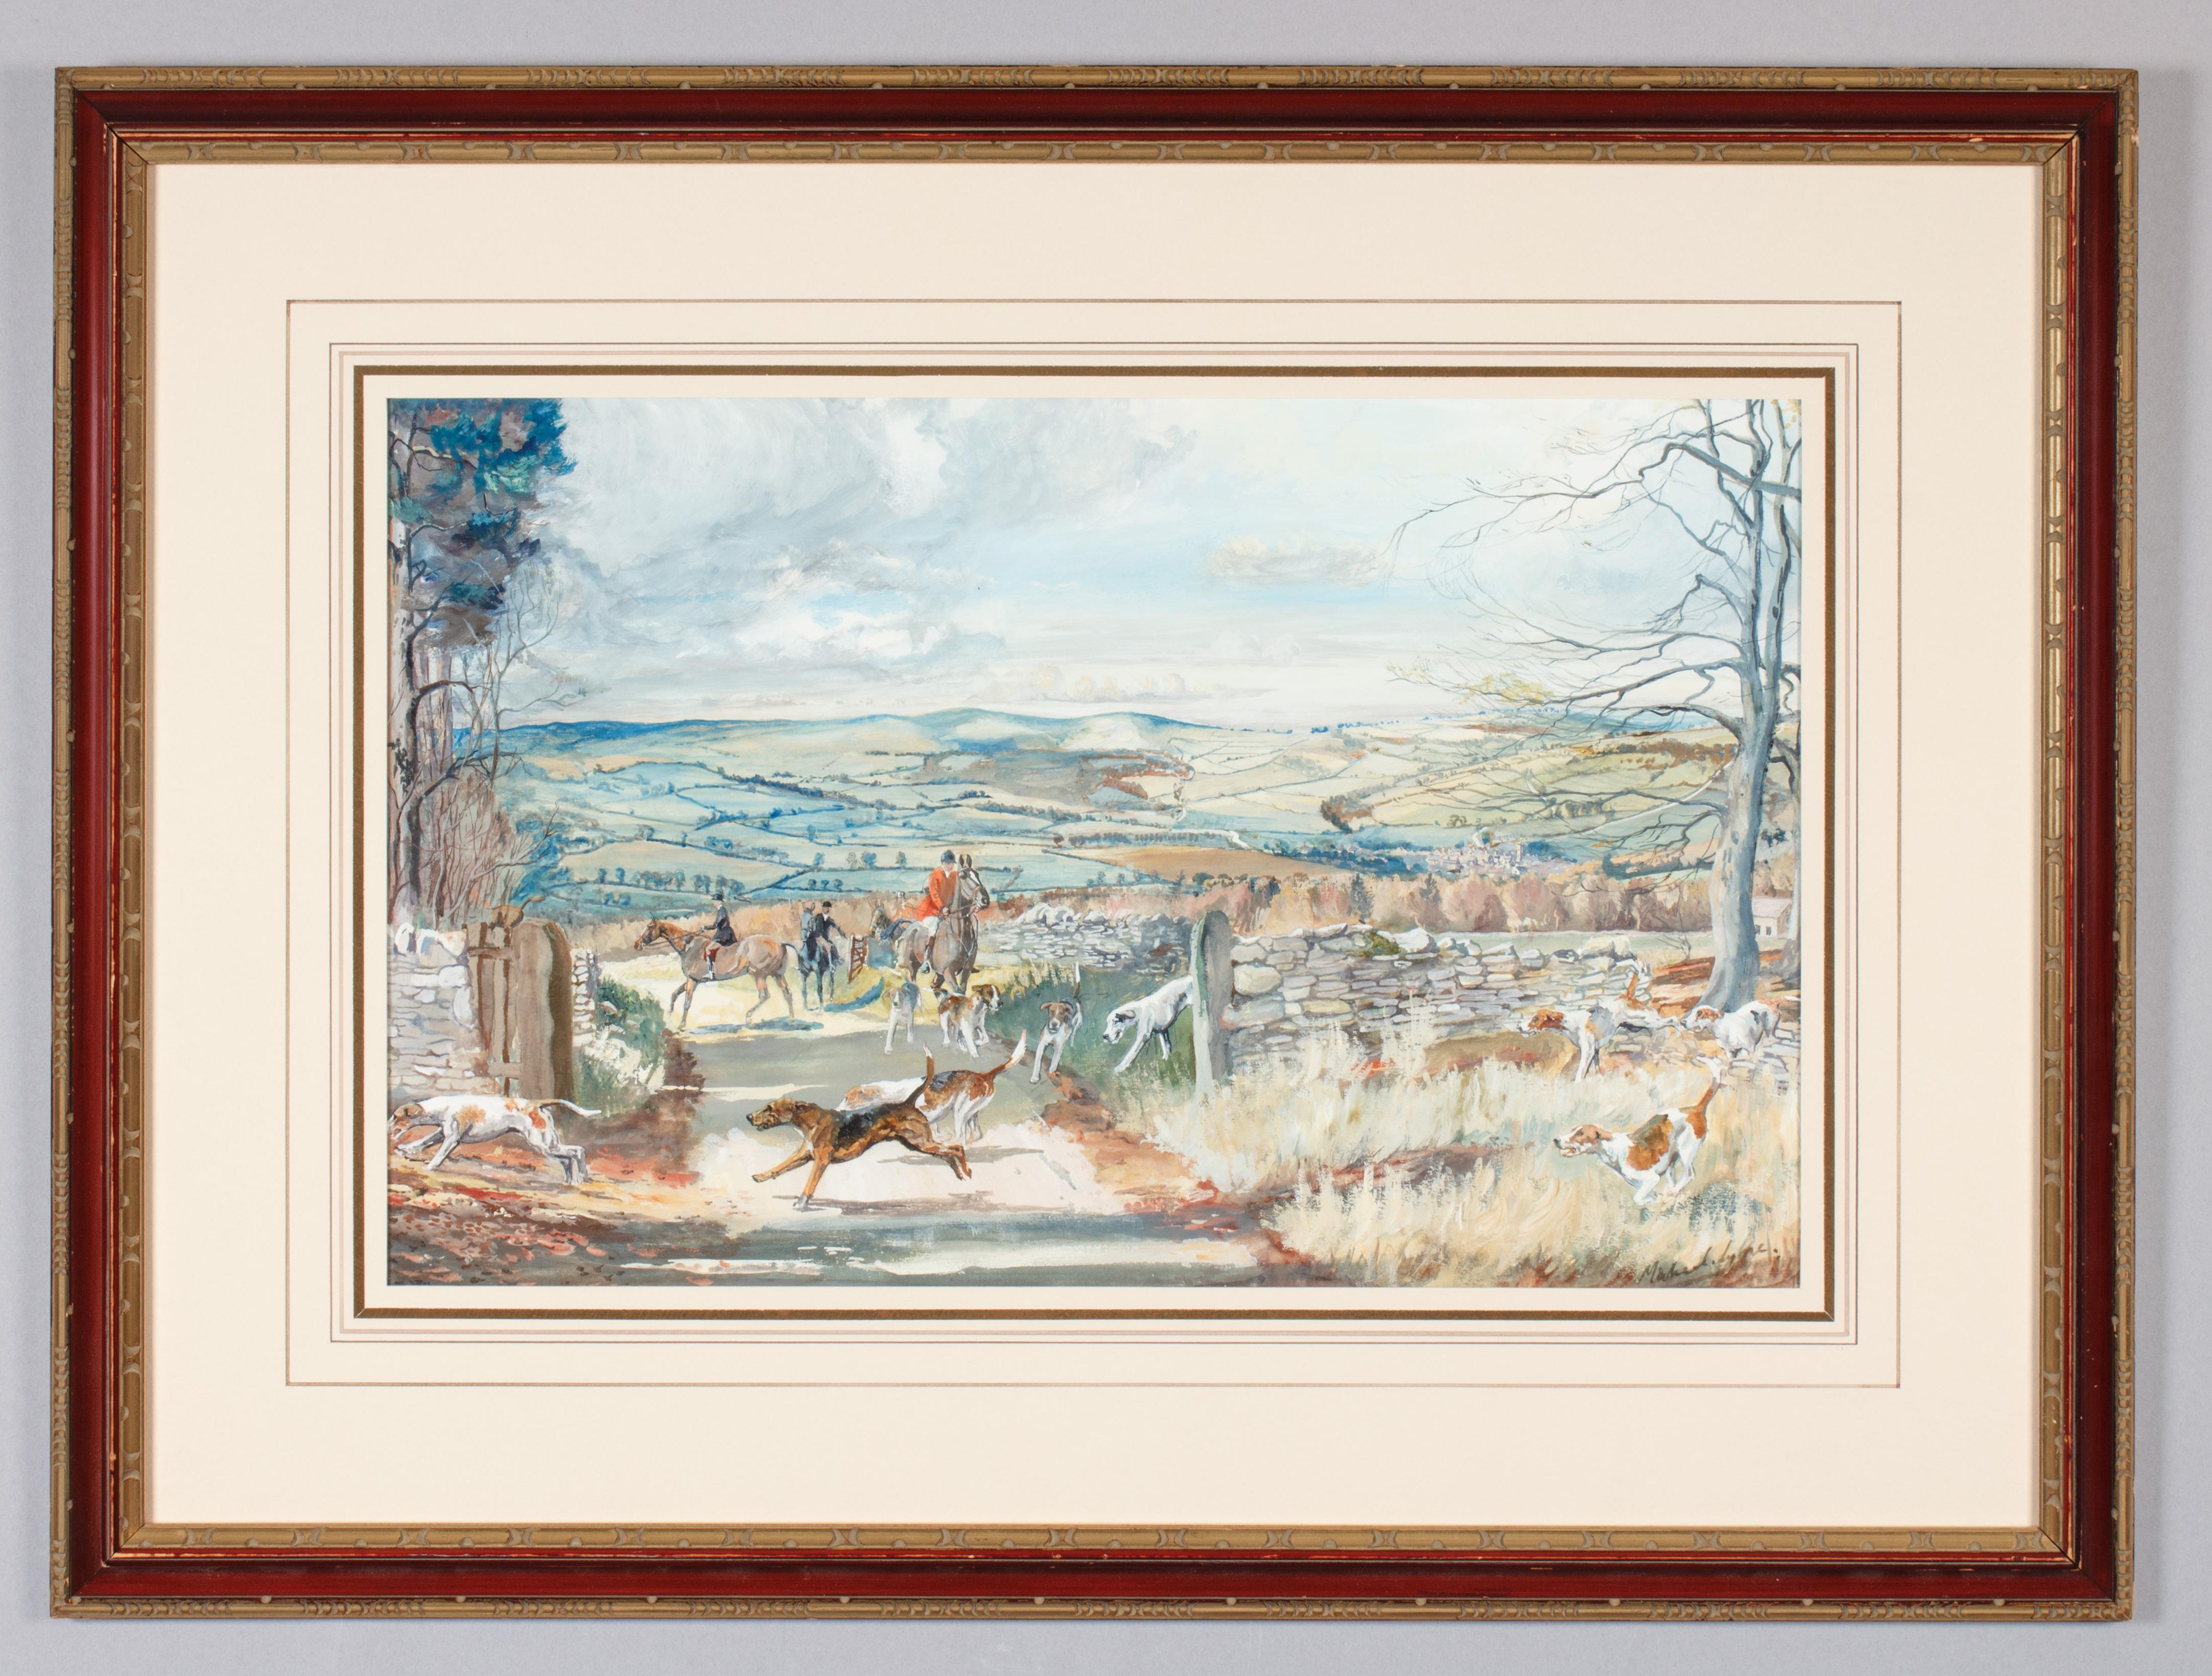 Michael Lyne
(English, 1912-1989)
North Cotswold Hounds on Sudeley Hill, 1934
Gouache on paper, 11 3/4 x 18 1/2 inches
Signed and dated at lower right: "Michael Lyne/34"
Inscribed in pencil at lower left: "C. Michael Lyne"; at lower right: "The